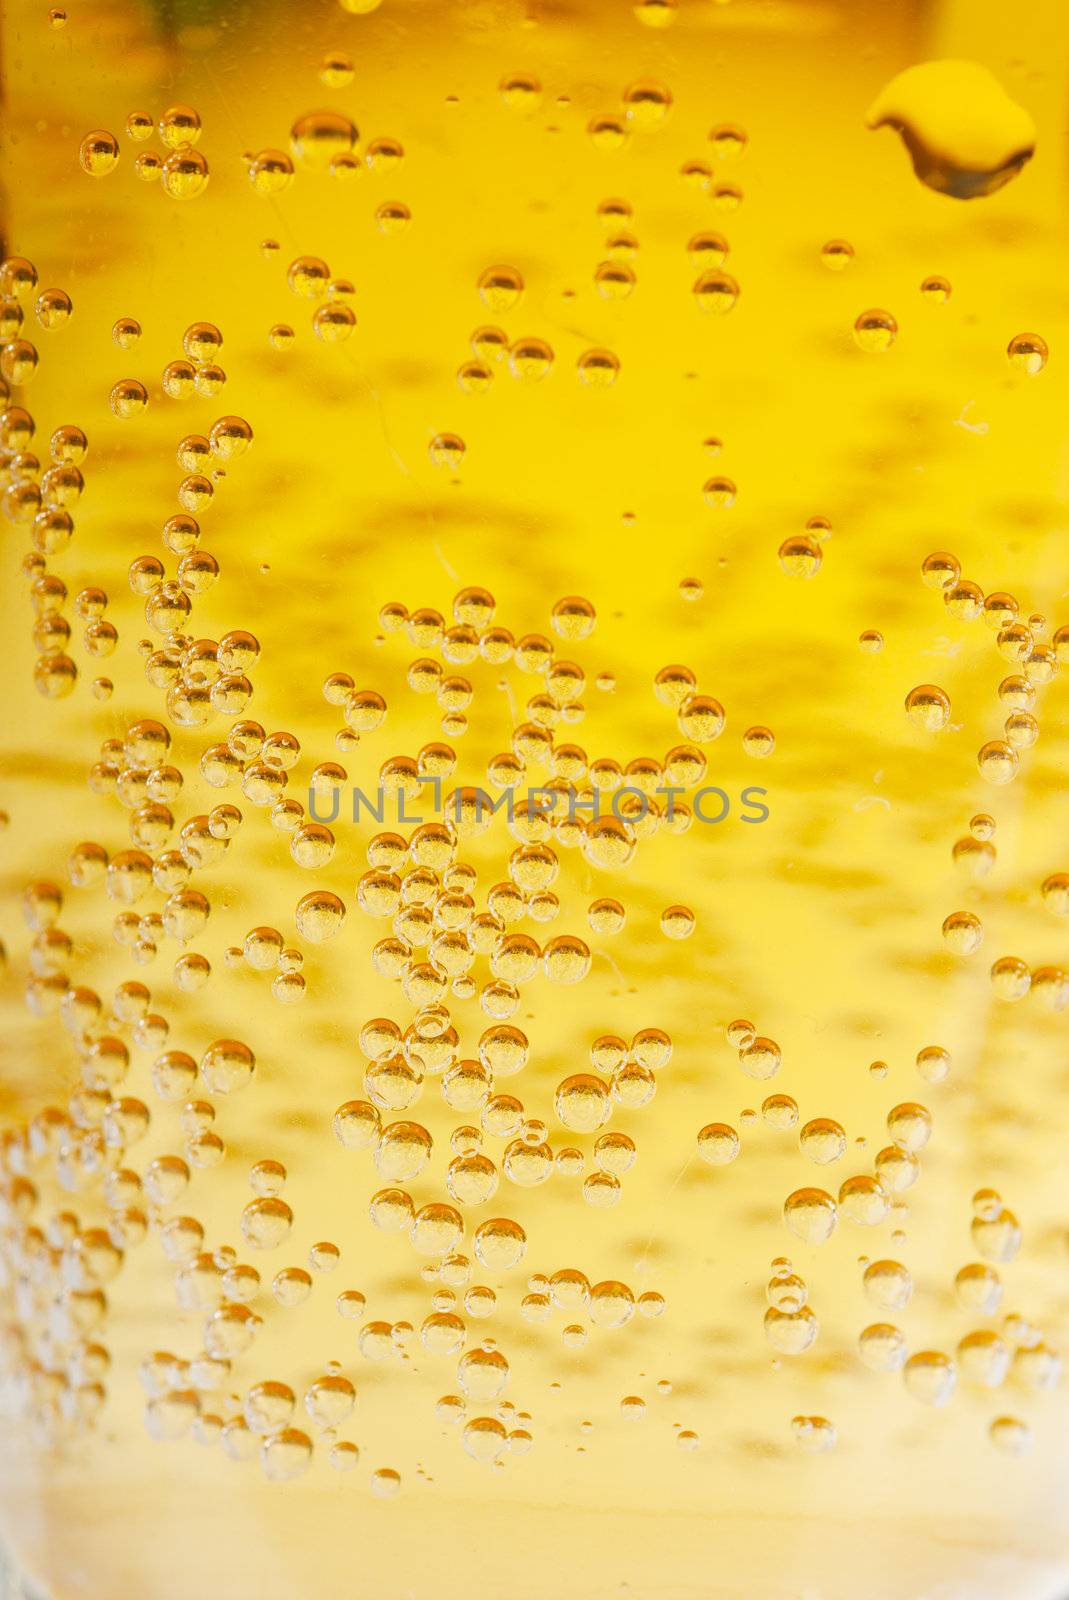 Orange beer with bubbles background. Closeup view.